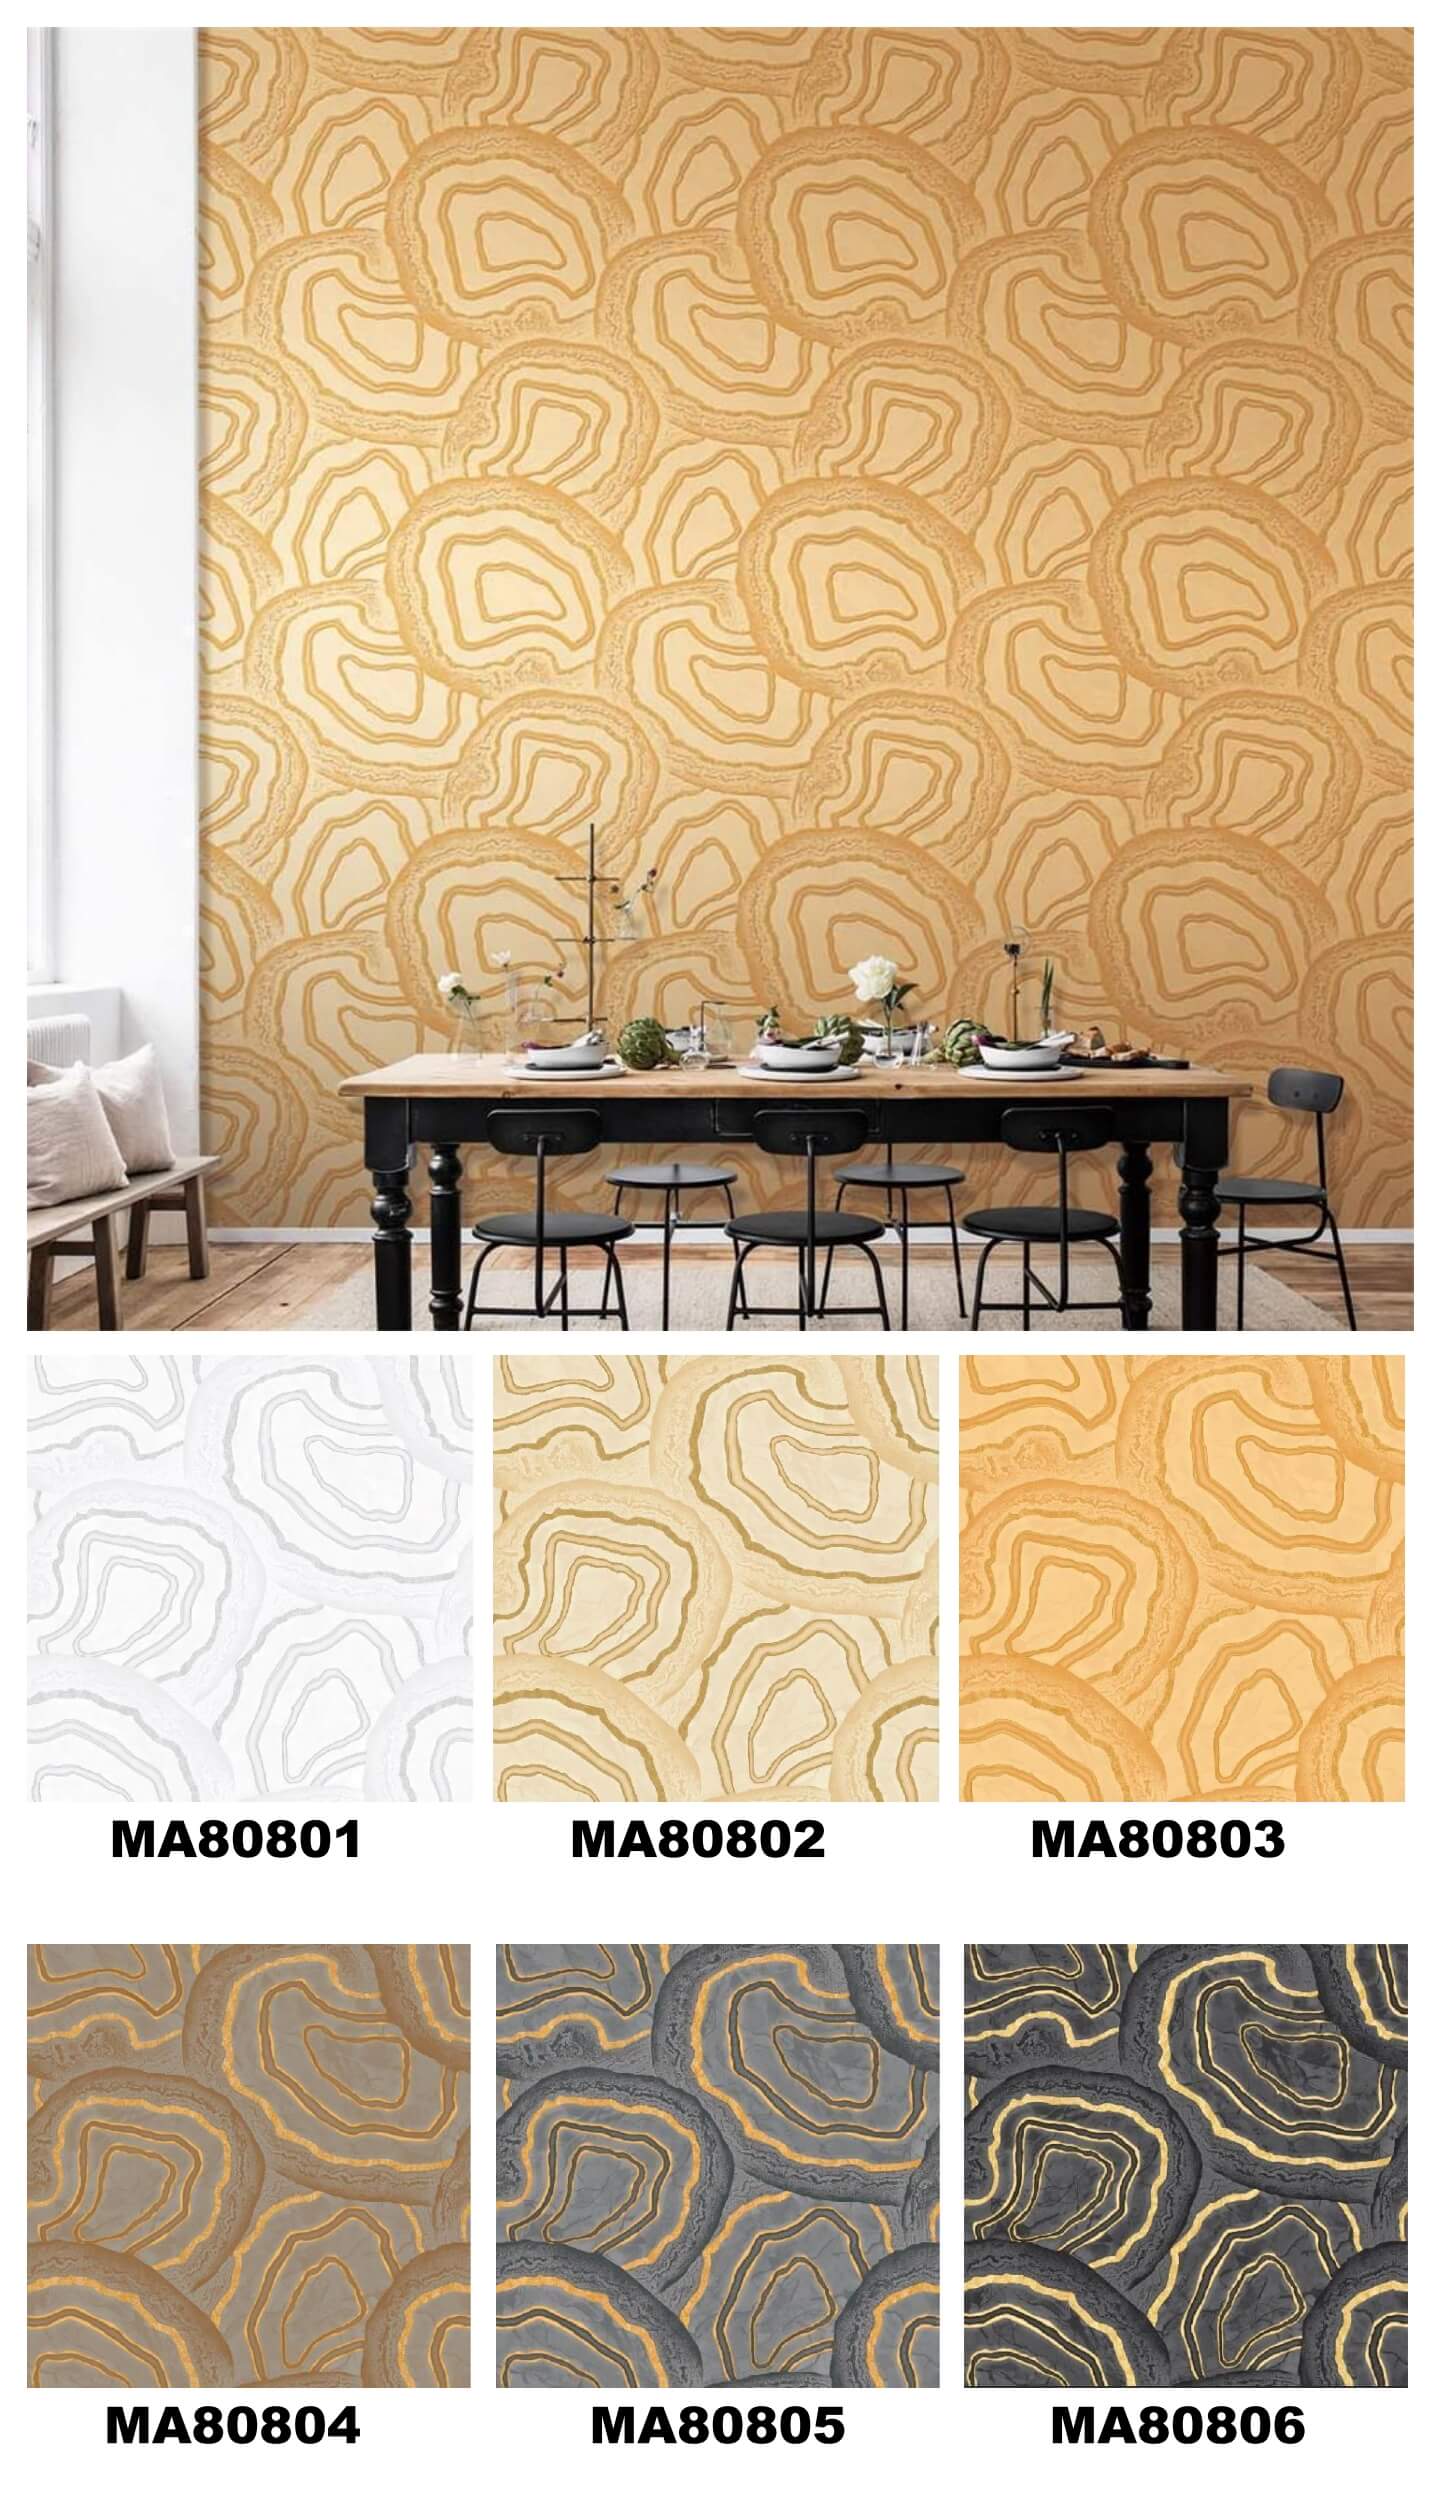 Beautiful Color 3D Design Wallpaper Better choice For Living Area, Bedroom, kids room, Office Durable PVC Wallpapers (9)